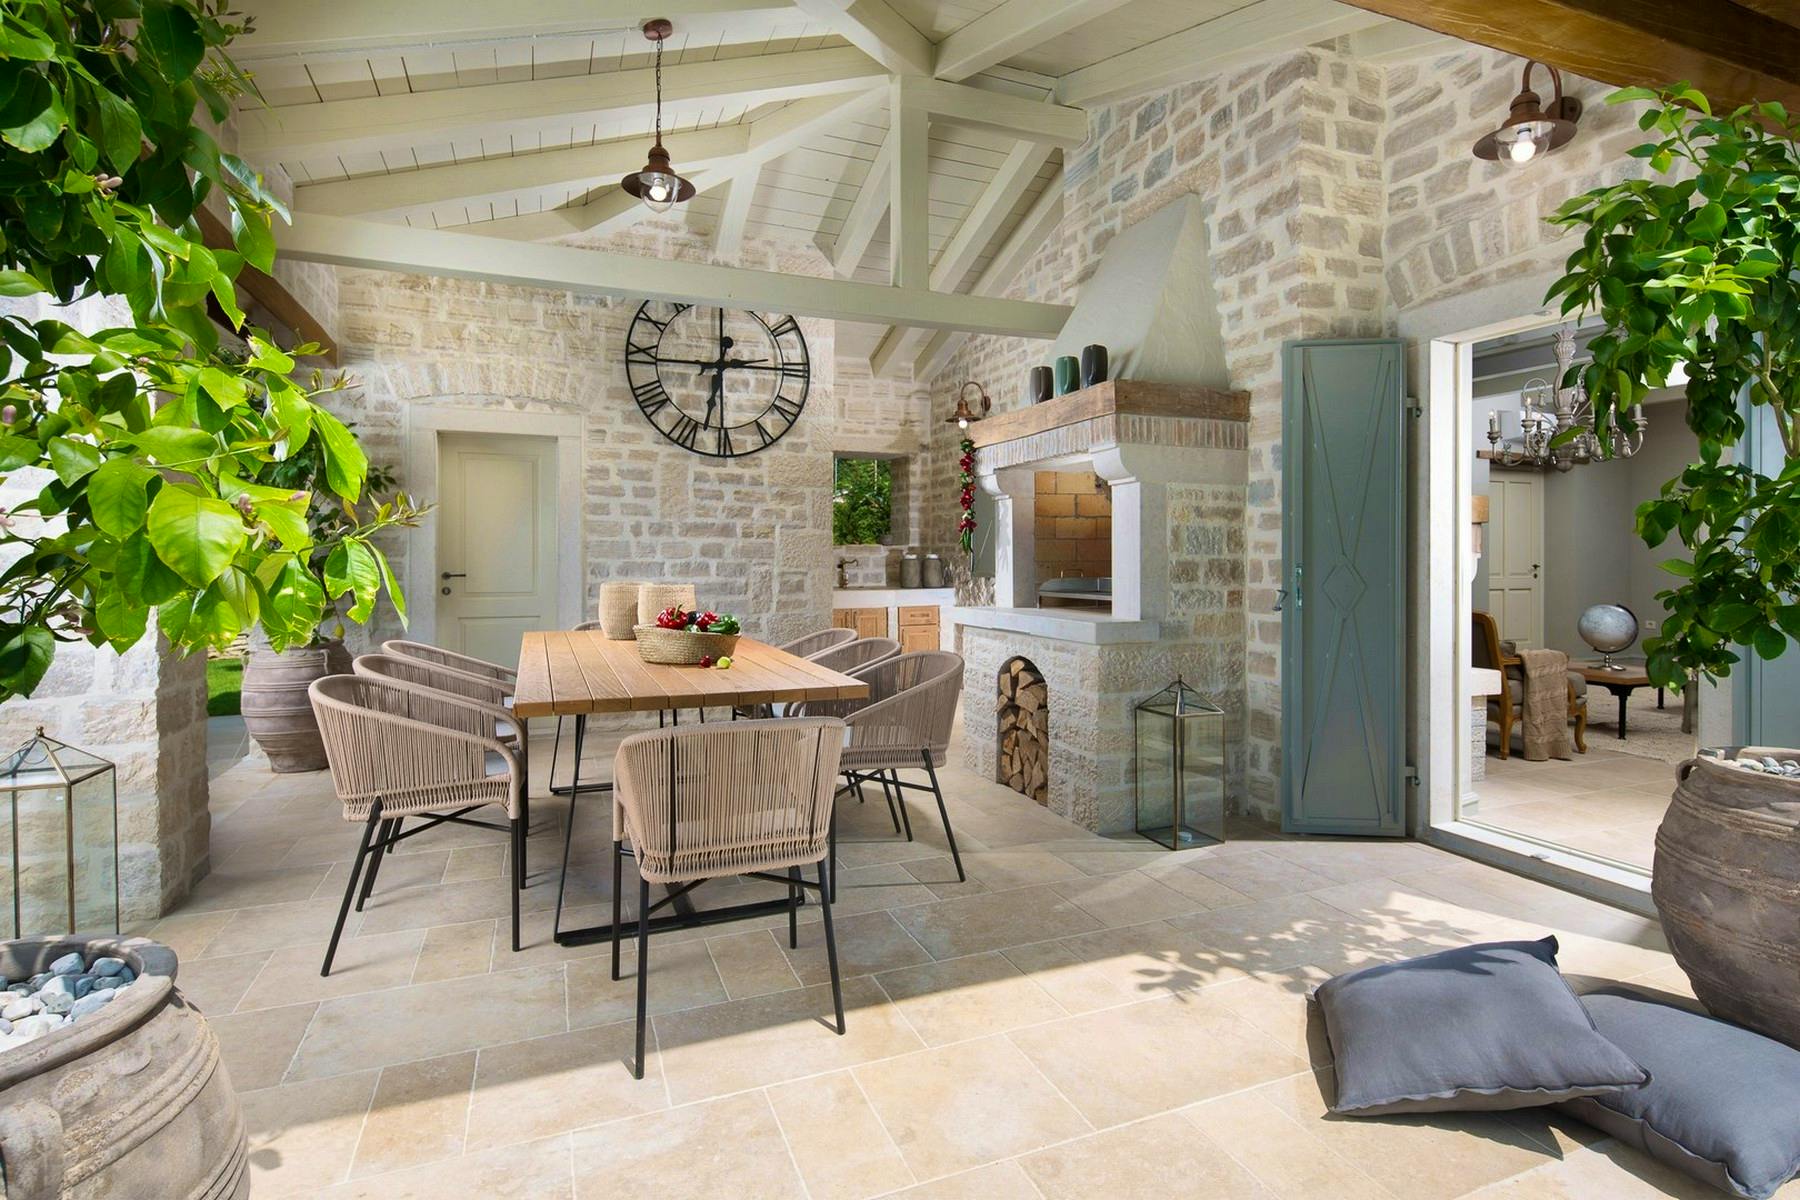 Outside dining area with stone barbecue